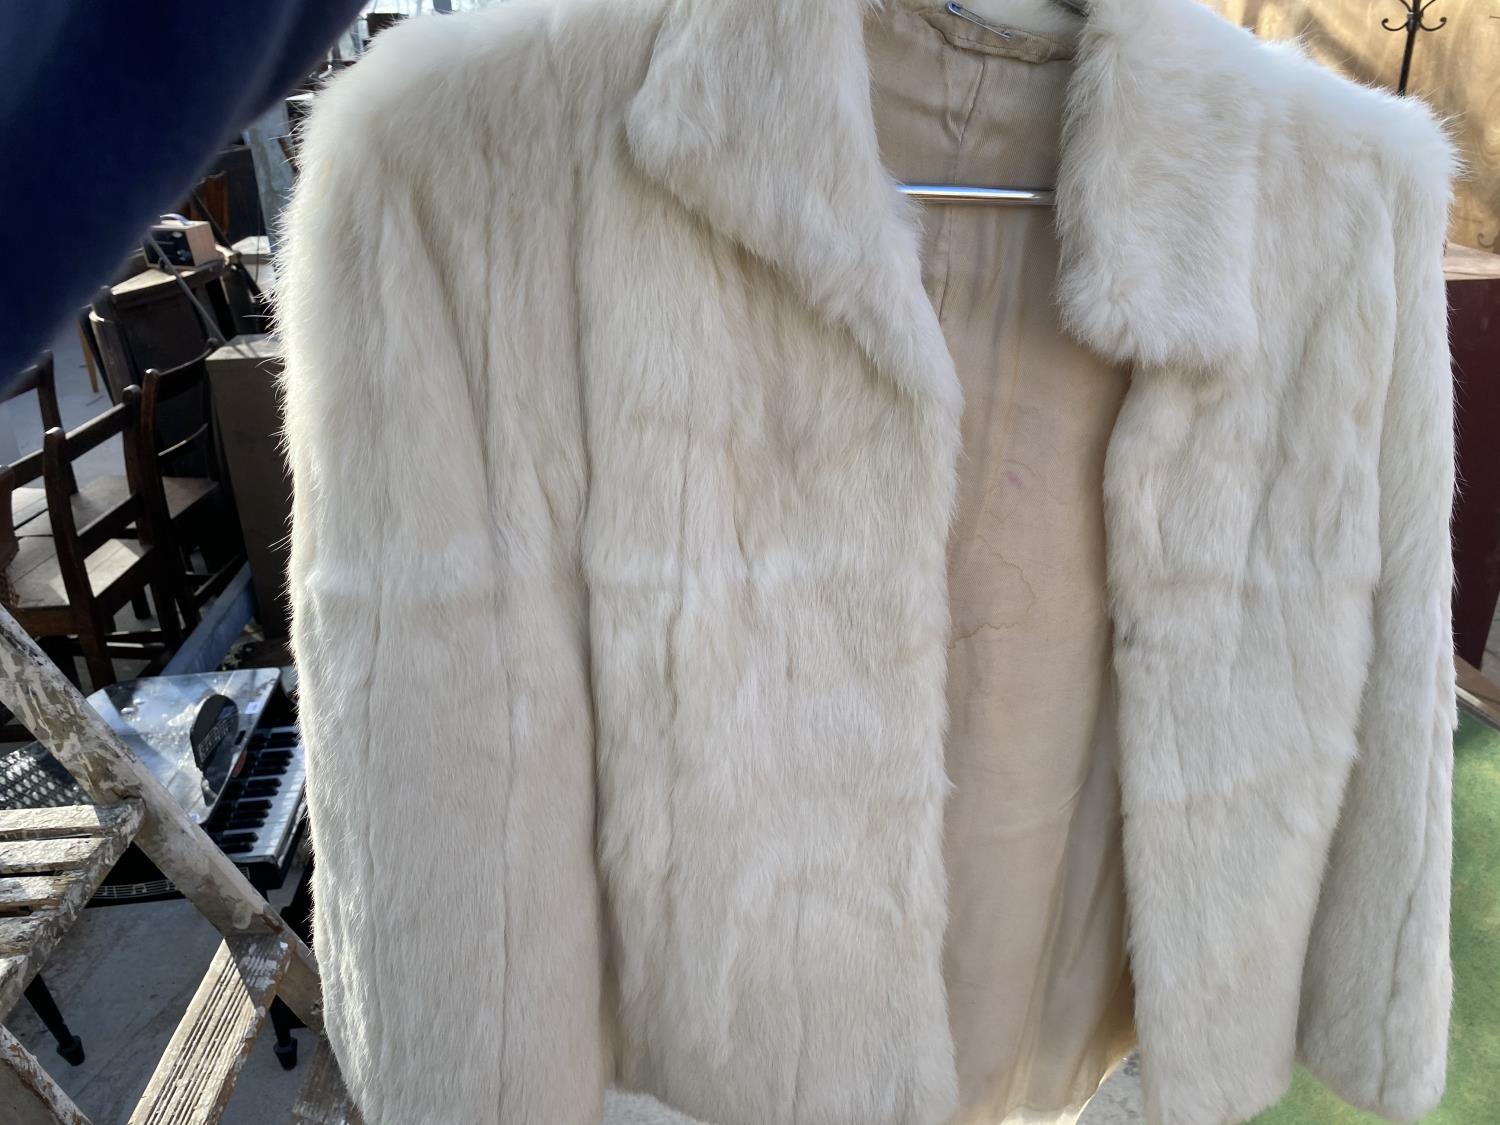 THREE ITEMS OF LADIES FAUX FUR CLOTHING TO INCLUDE JACKETS AND STOLE ETC - Image 3 of 5